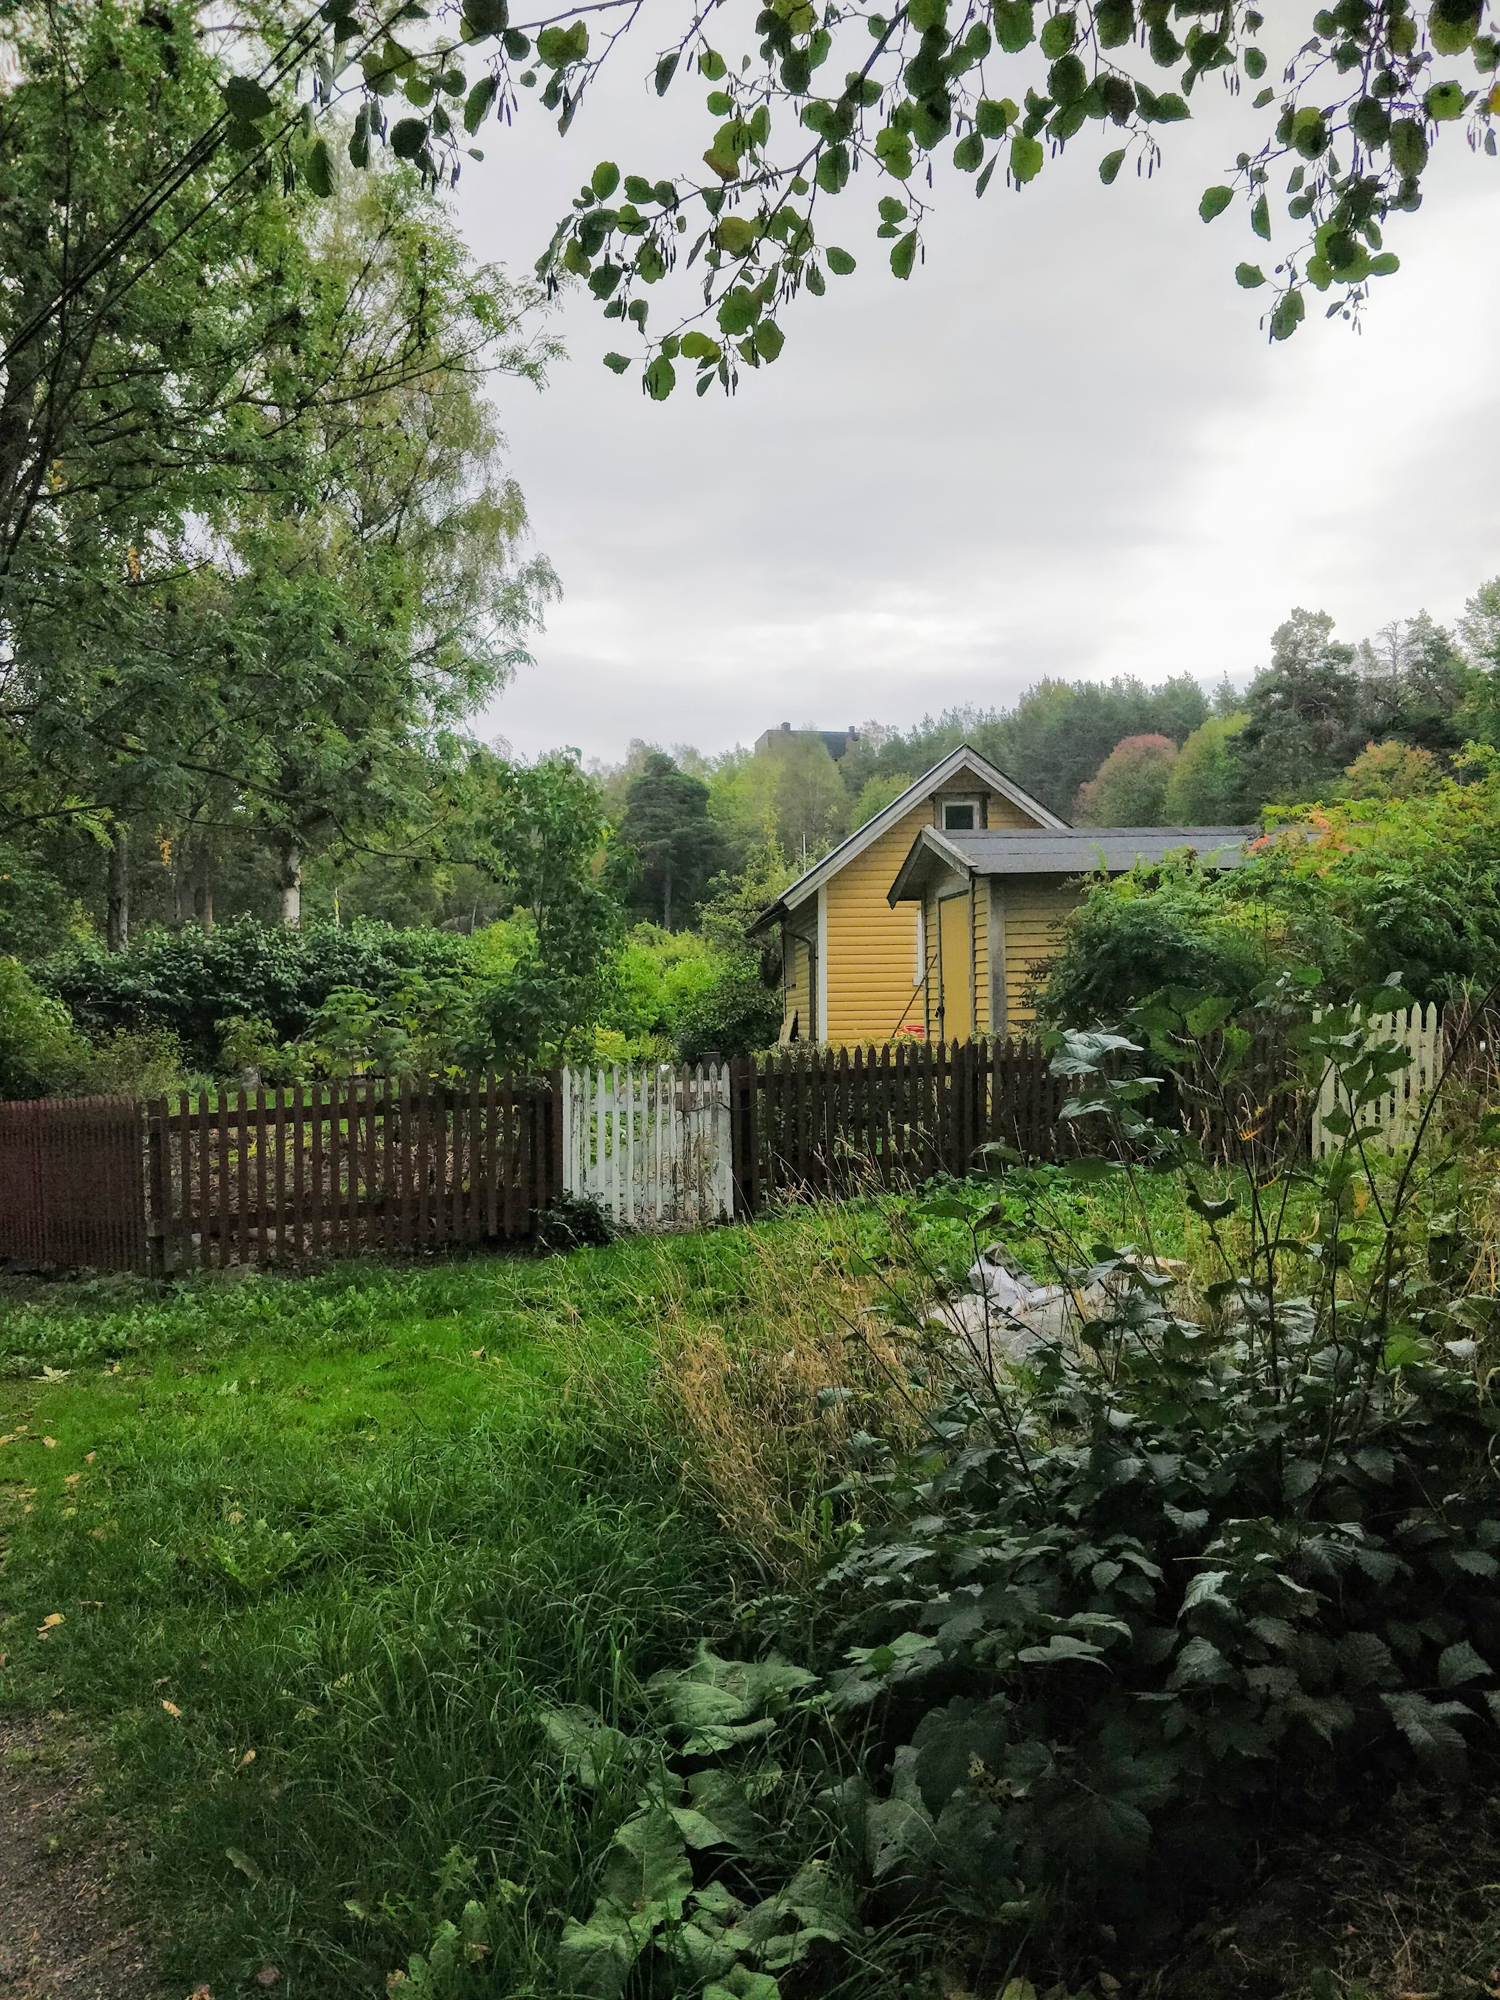 Reference picture - a cabin in a communal garden